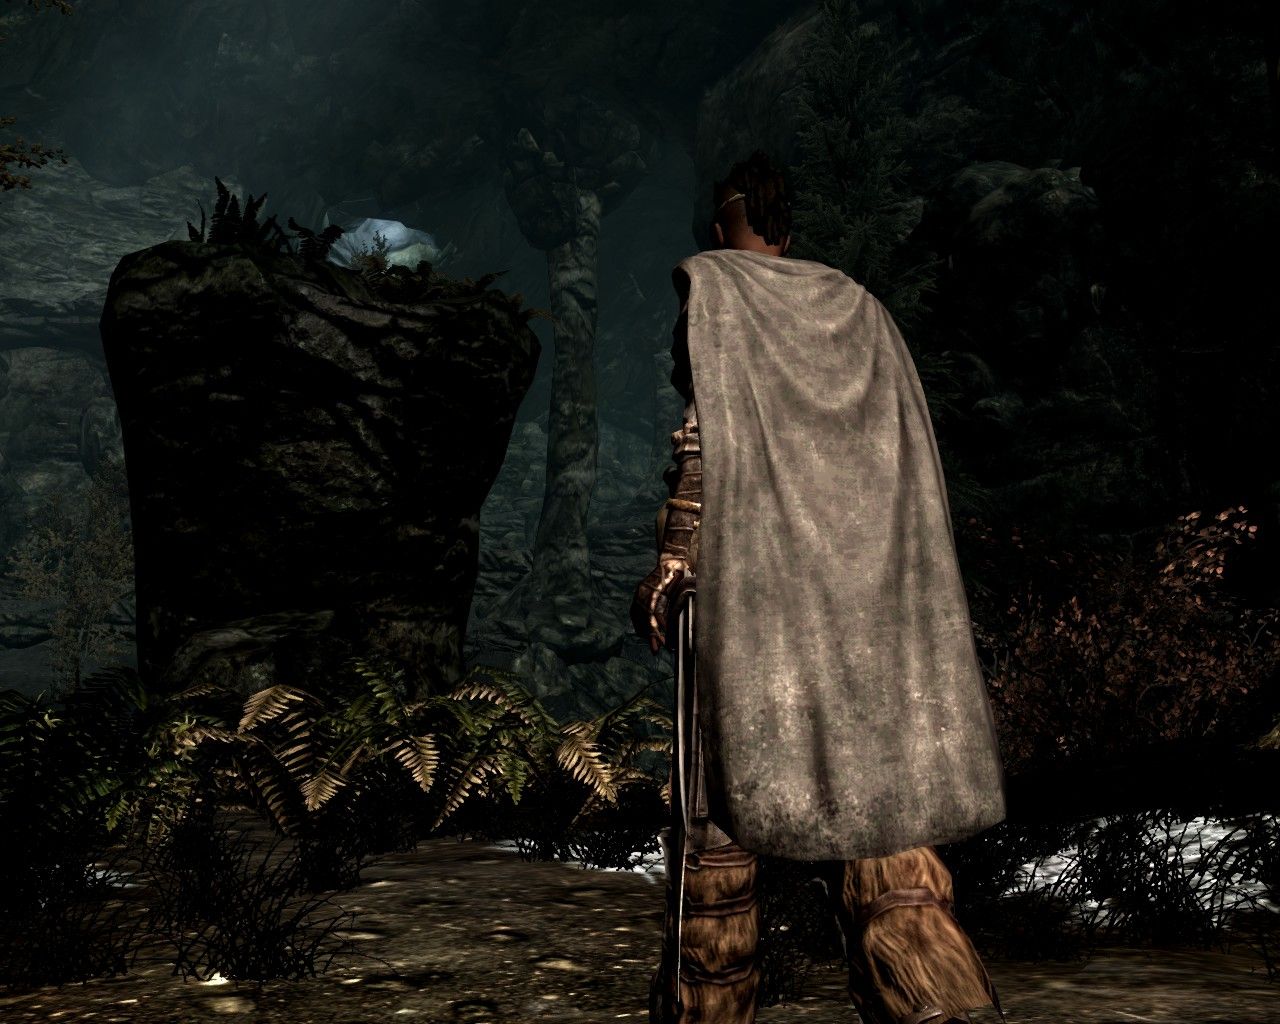 skyrim cloaks and capes spinning wheel